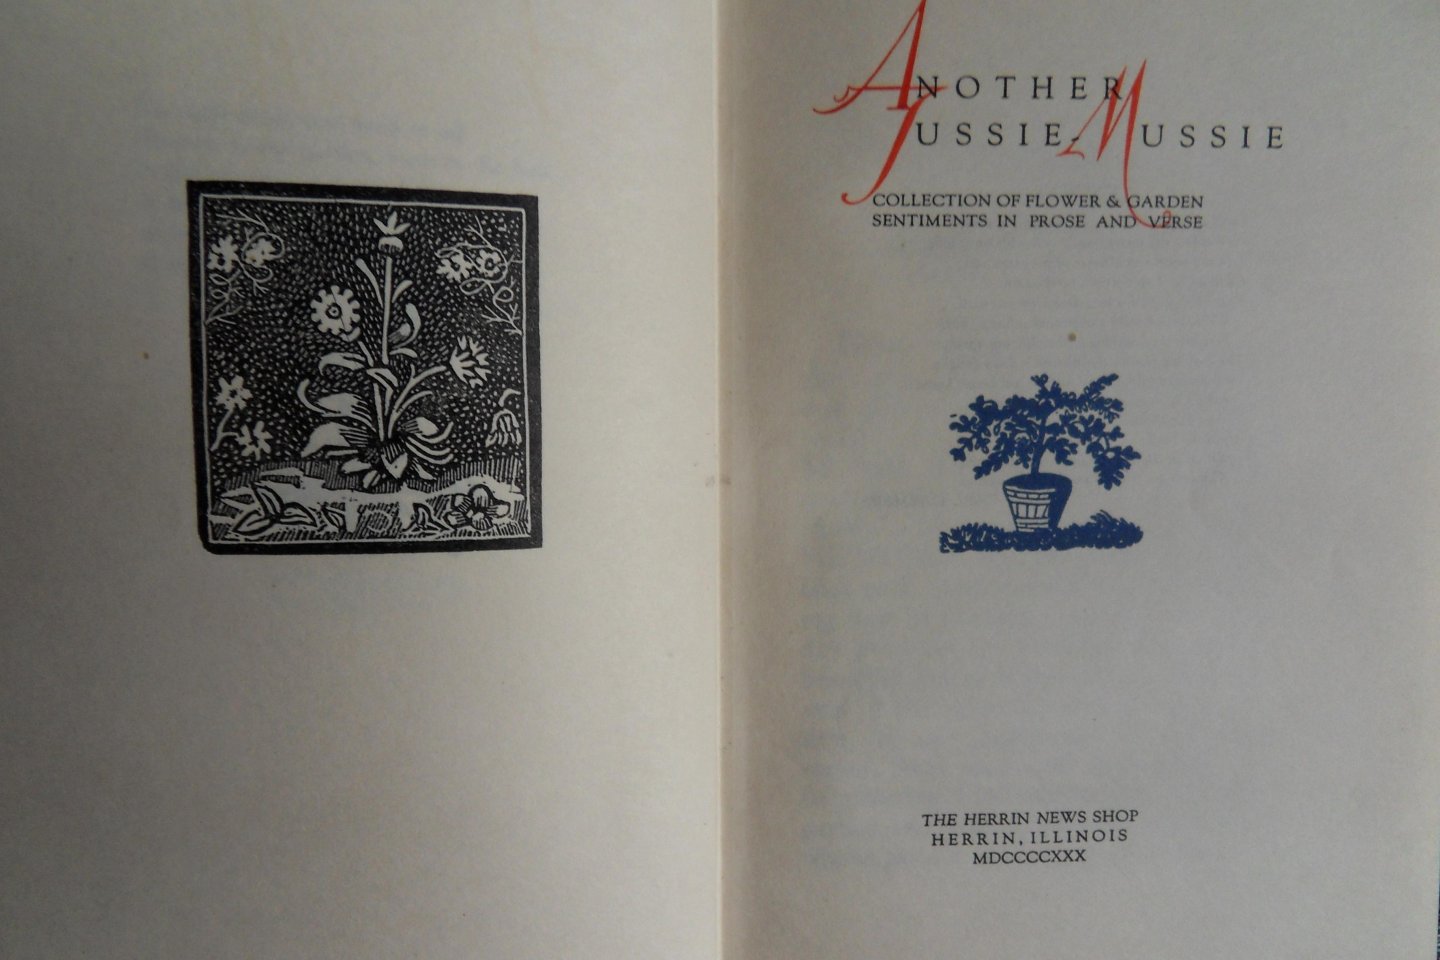 Trovillion, Violet and Hal W. (SIGNED by both). - They picked these beautiful 'verses' from their 'garden' . - Another Tussie Mussie. - Collection of Flower & Garden Sentiments in Prose and Verse. [Genummerd ex. 66 / 108 ].